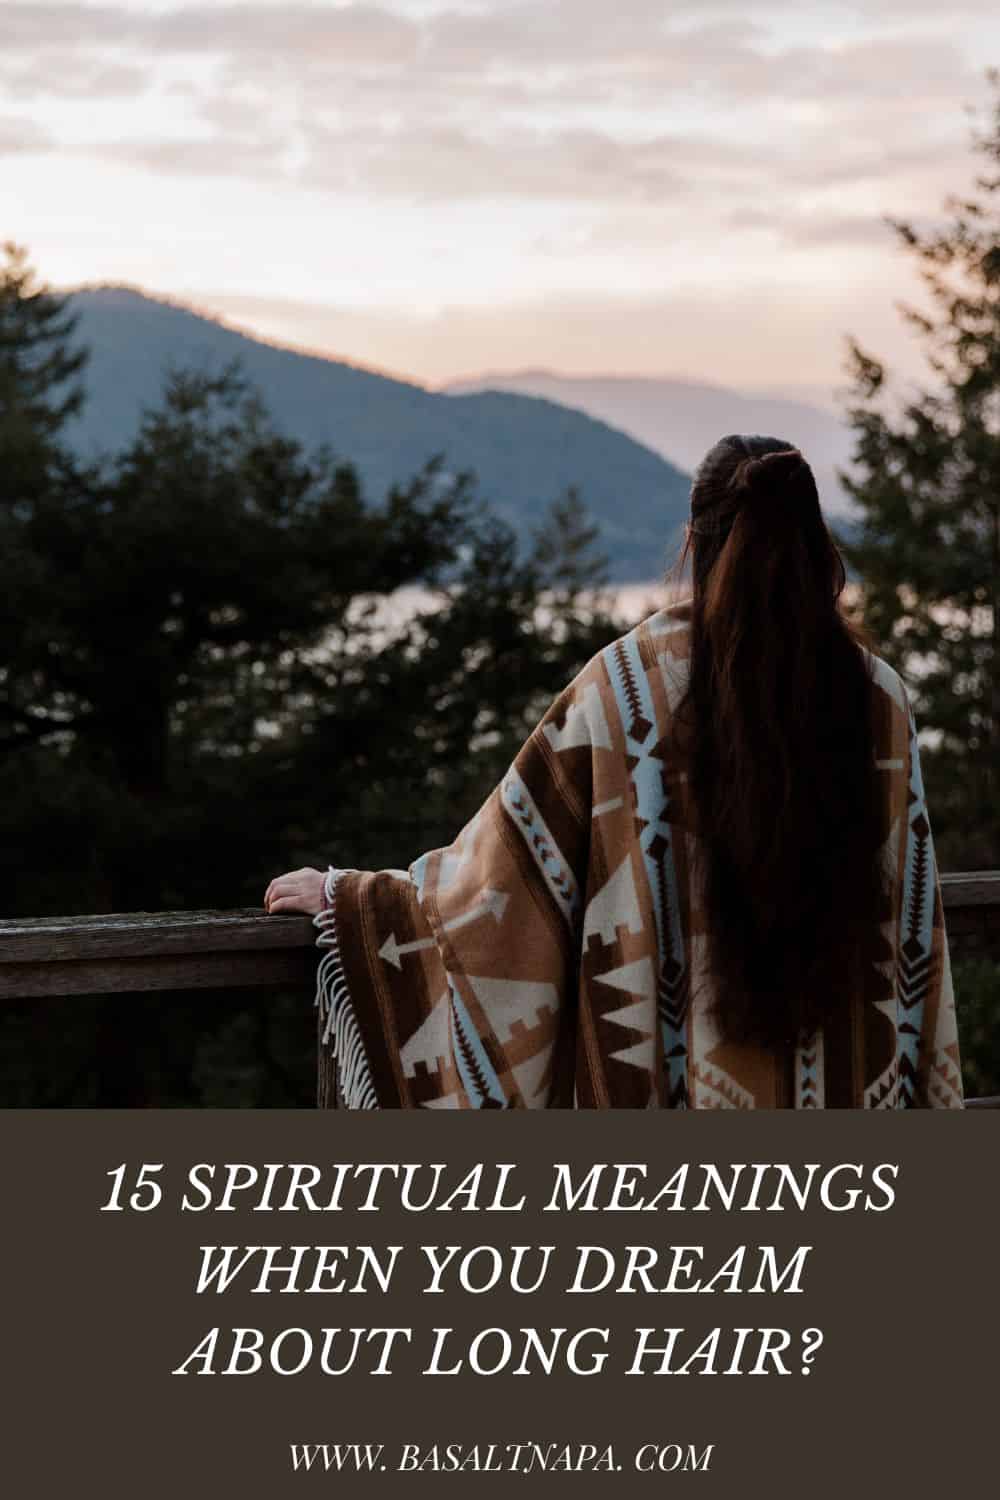 15 Spiritual Meanings When You Dream About Long Hair?